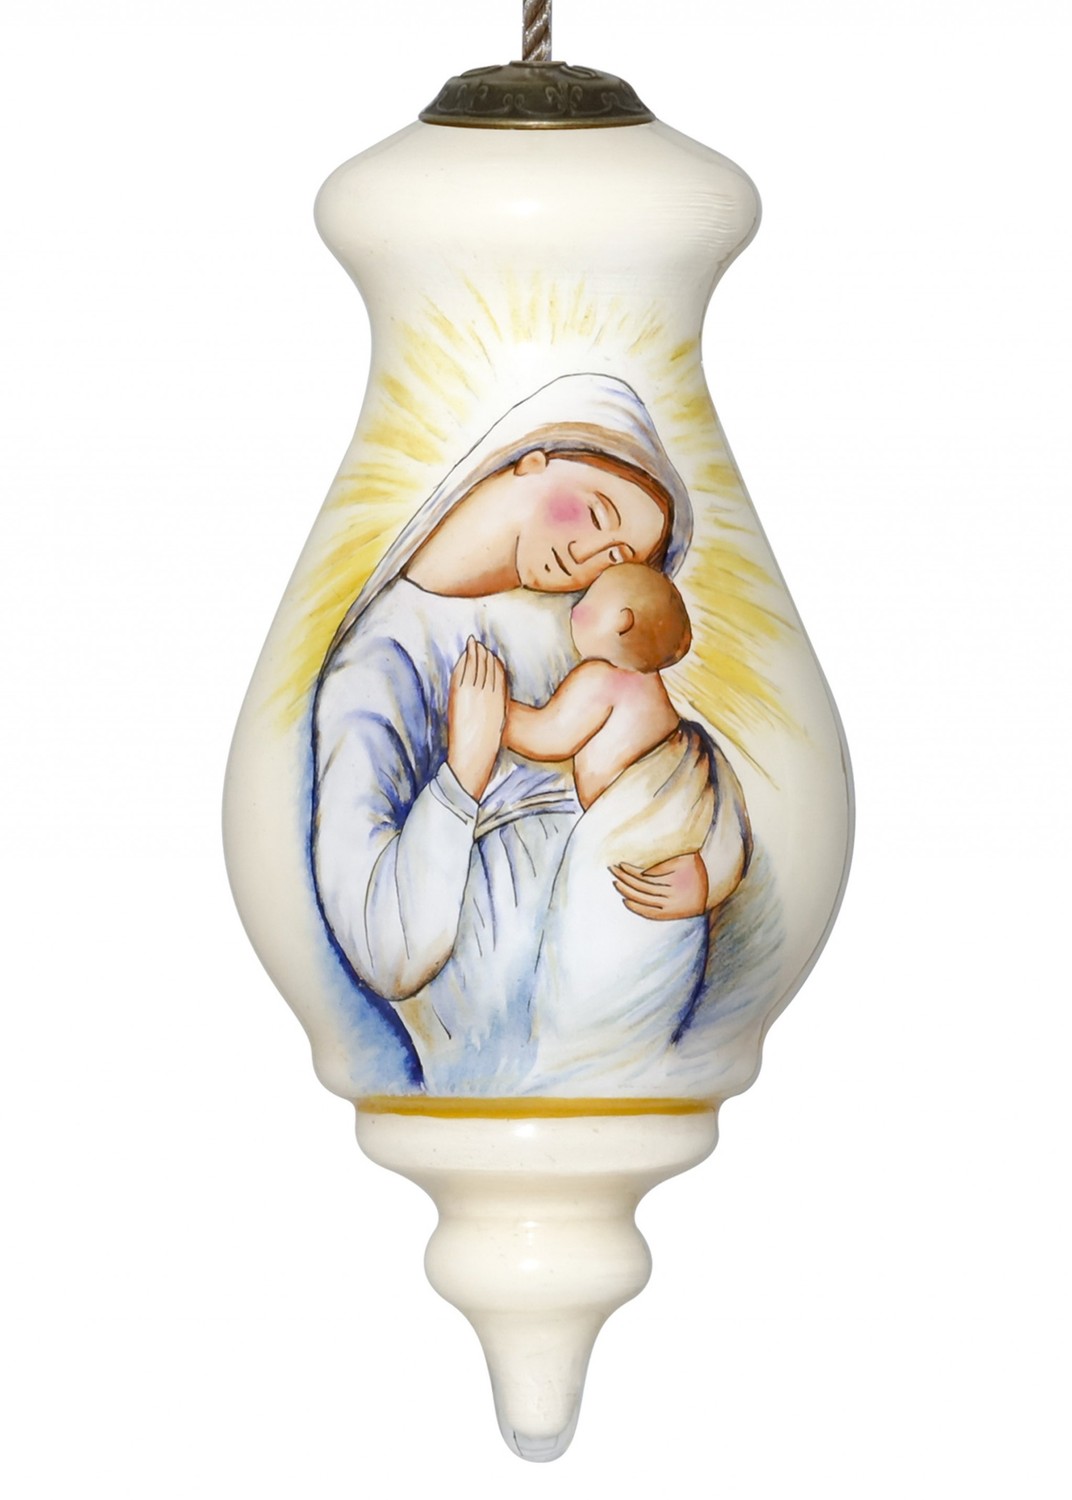 Mother Mary with Baby Hand Painted Mouth Blown Glass Ornament